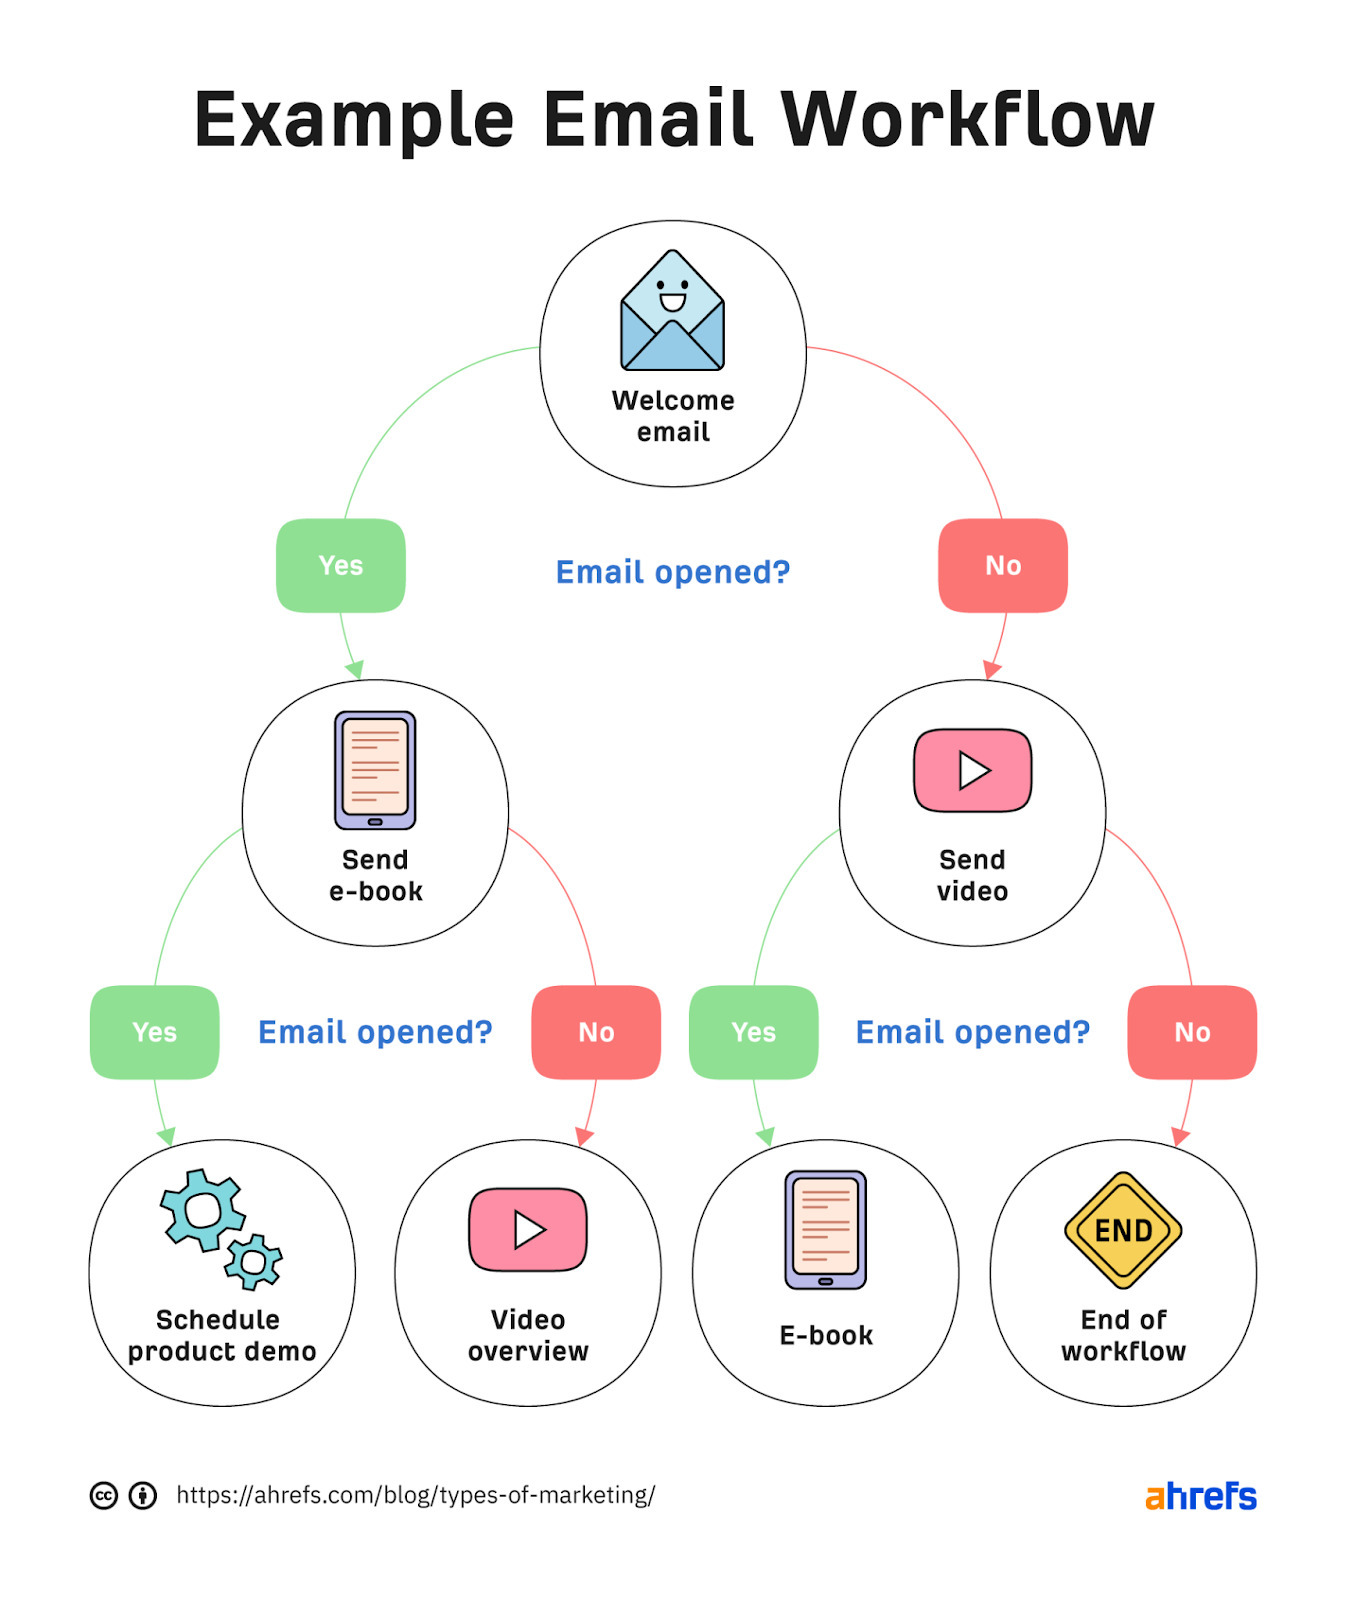 Flowchart of example email workflow